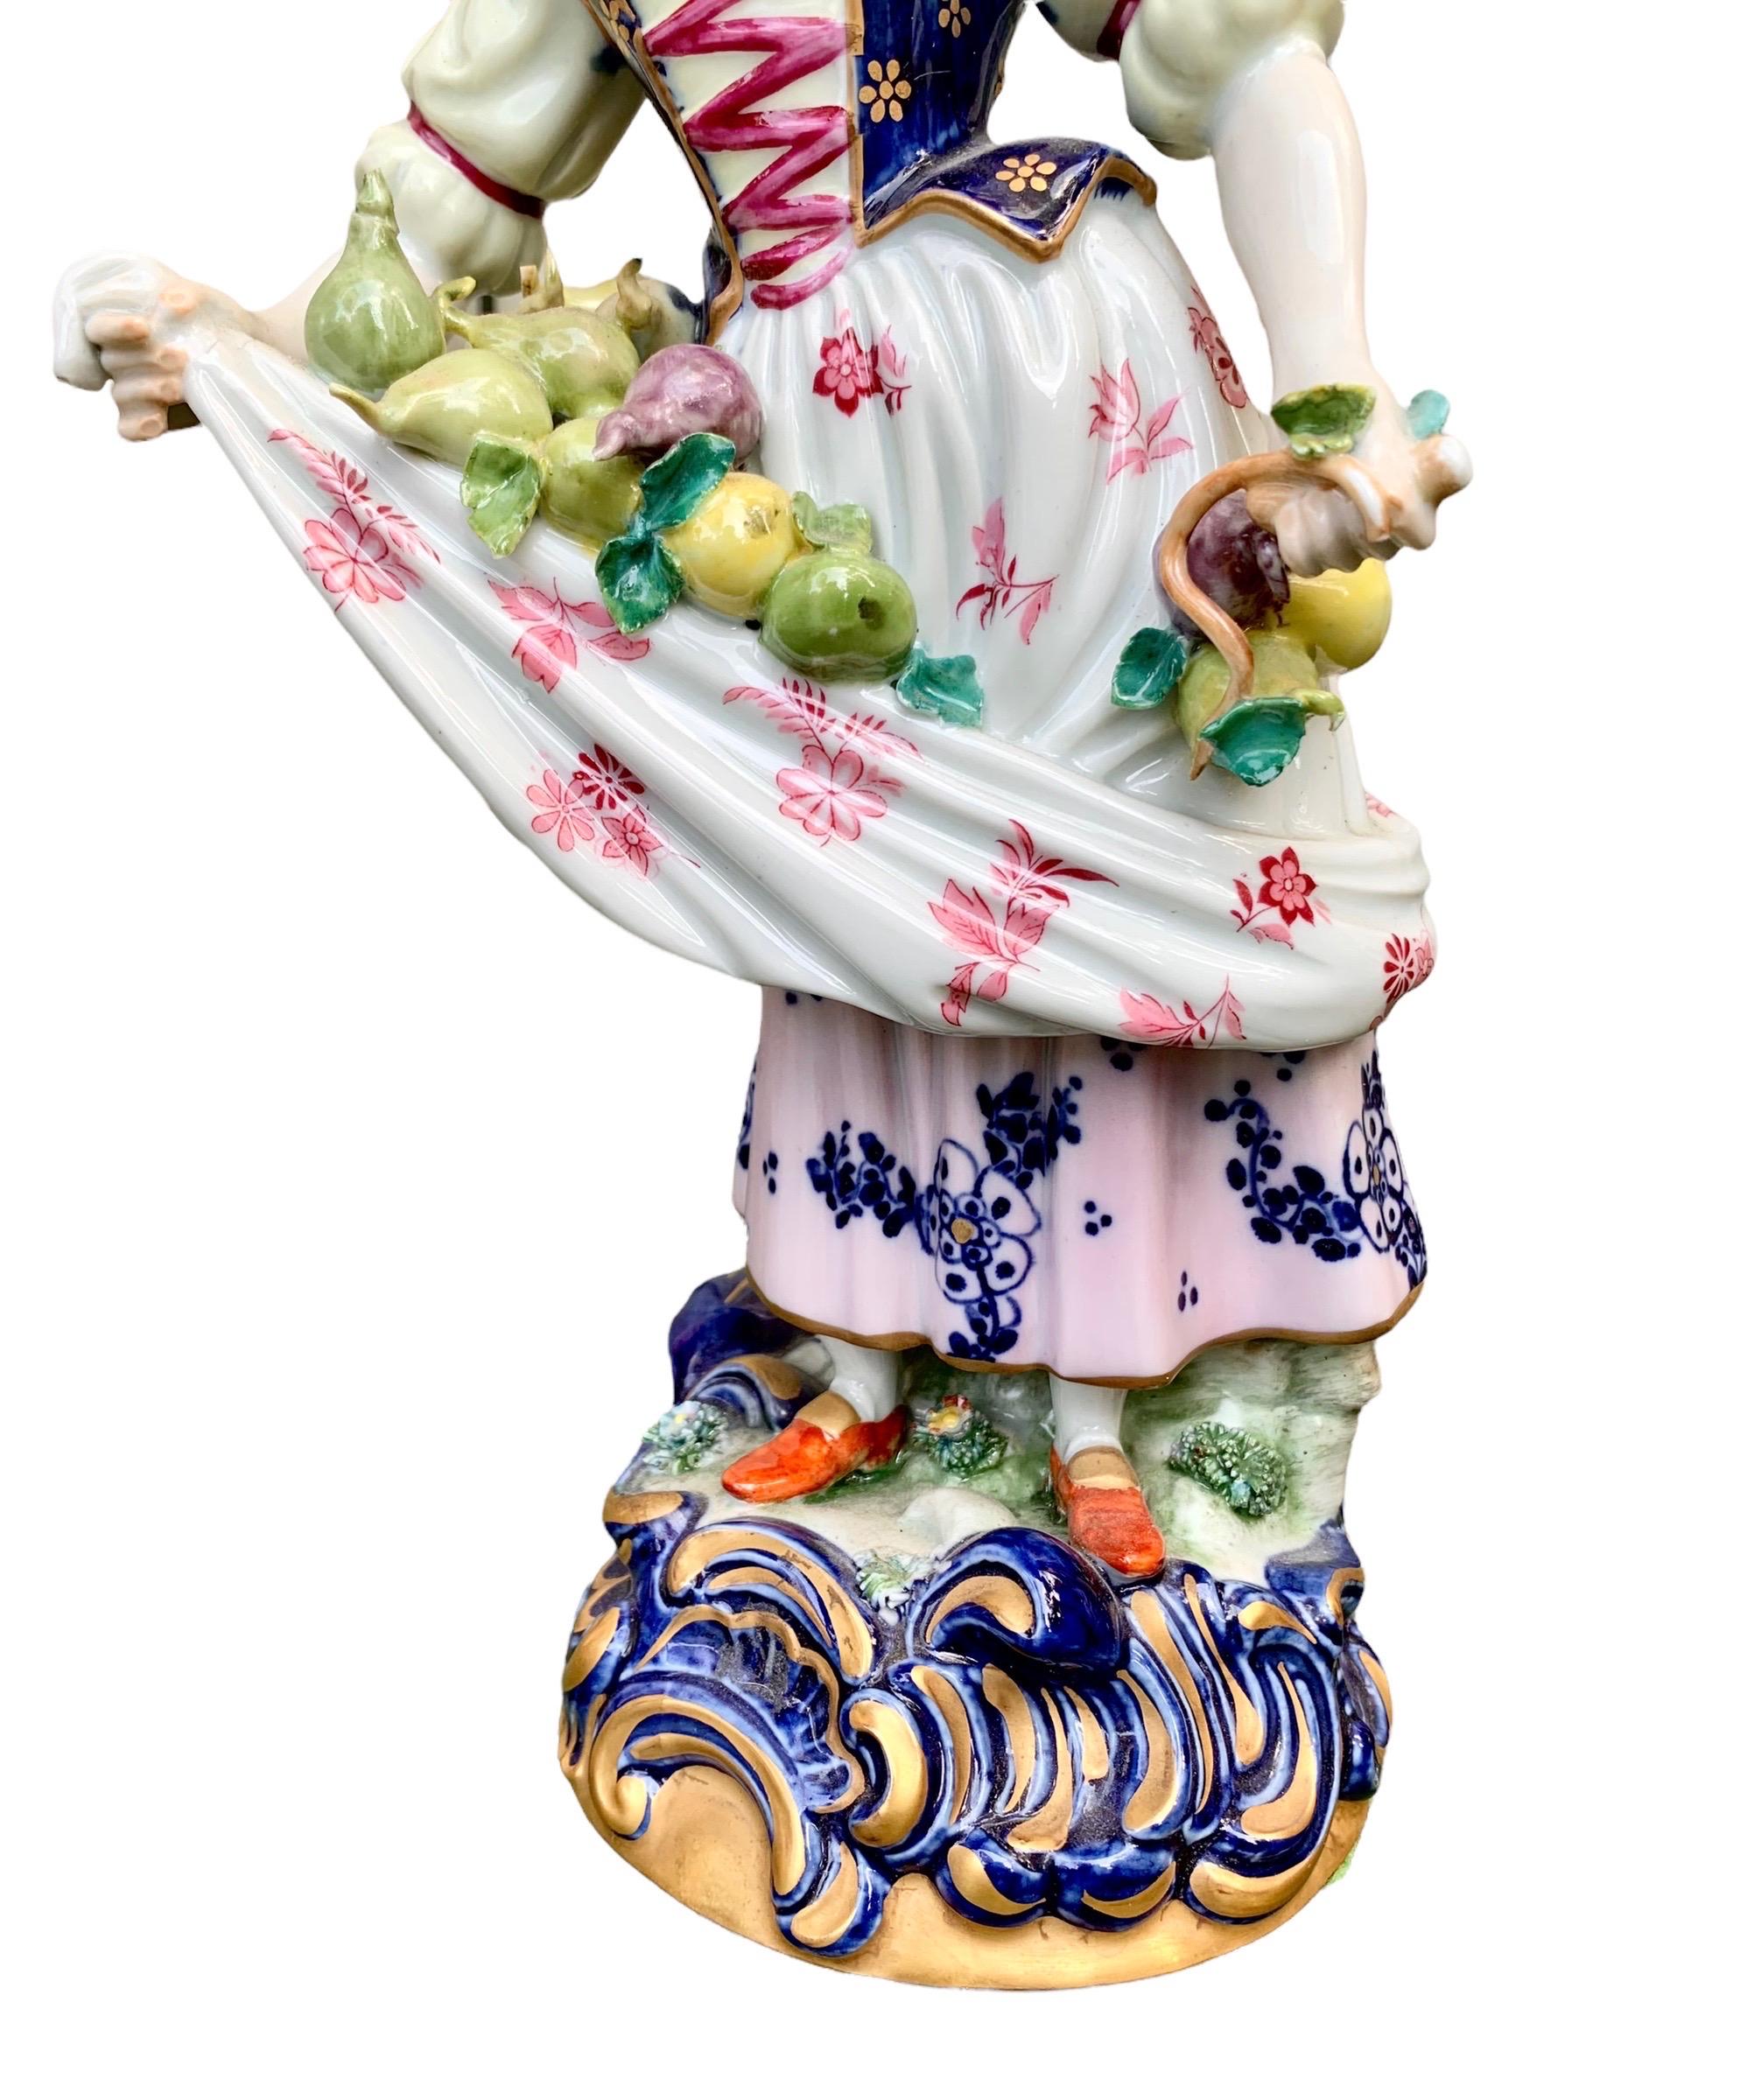 Pair of Early 19th C. Sevres Porcelain Figures For Sale 11